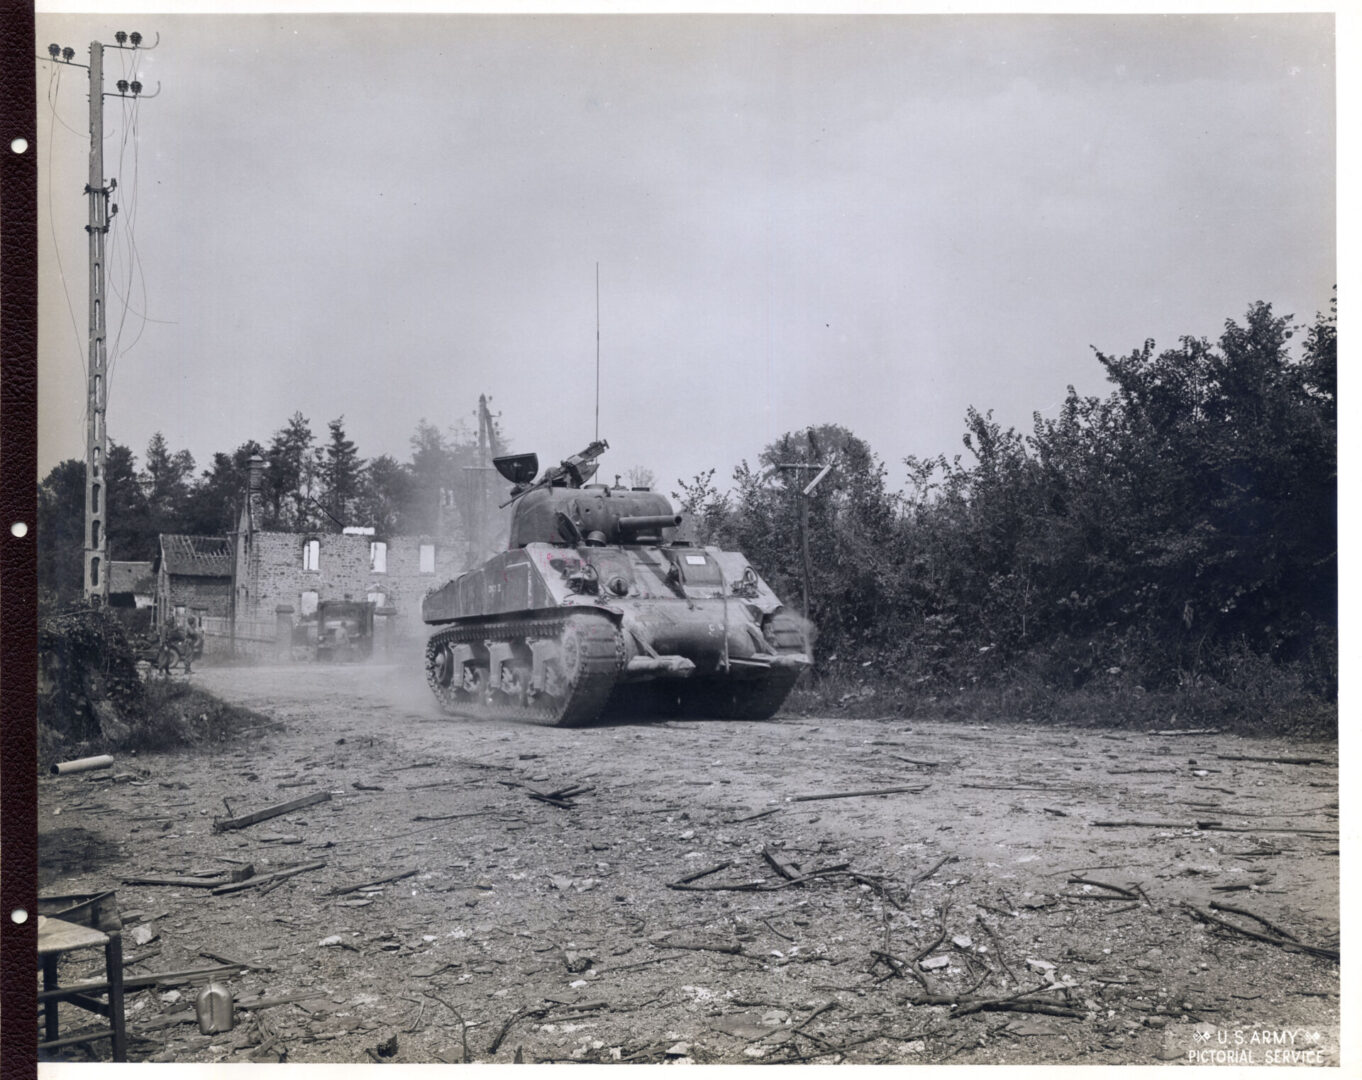 U.S. Army tank performing reconnaissance duty